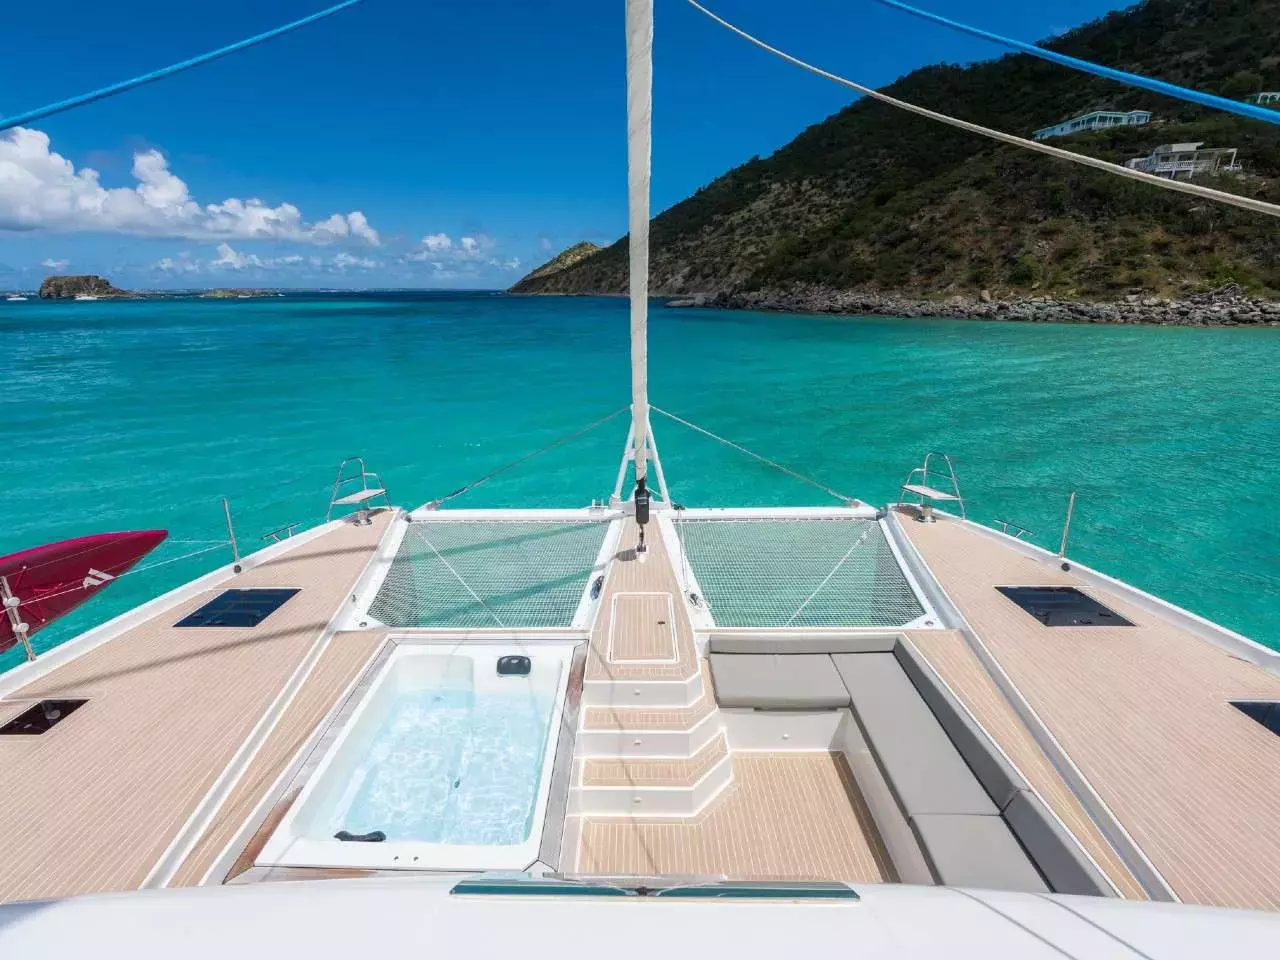 Adeona by Fountaine Pajot - Top rates for a Charter of a private Luxury Catamaran in Croatia